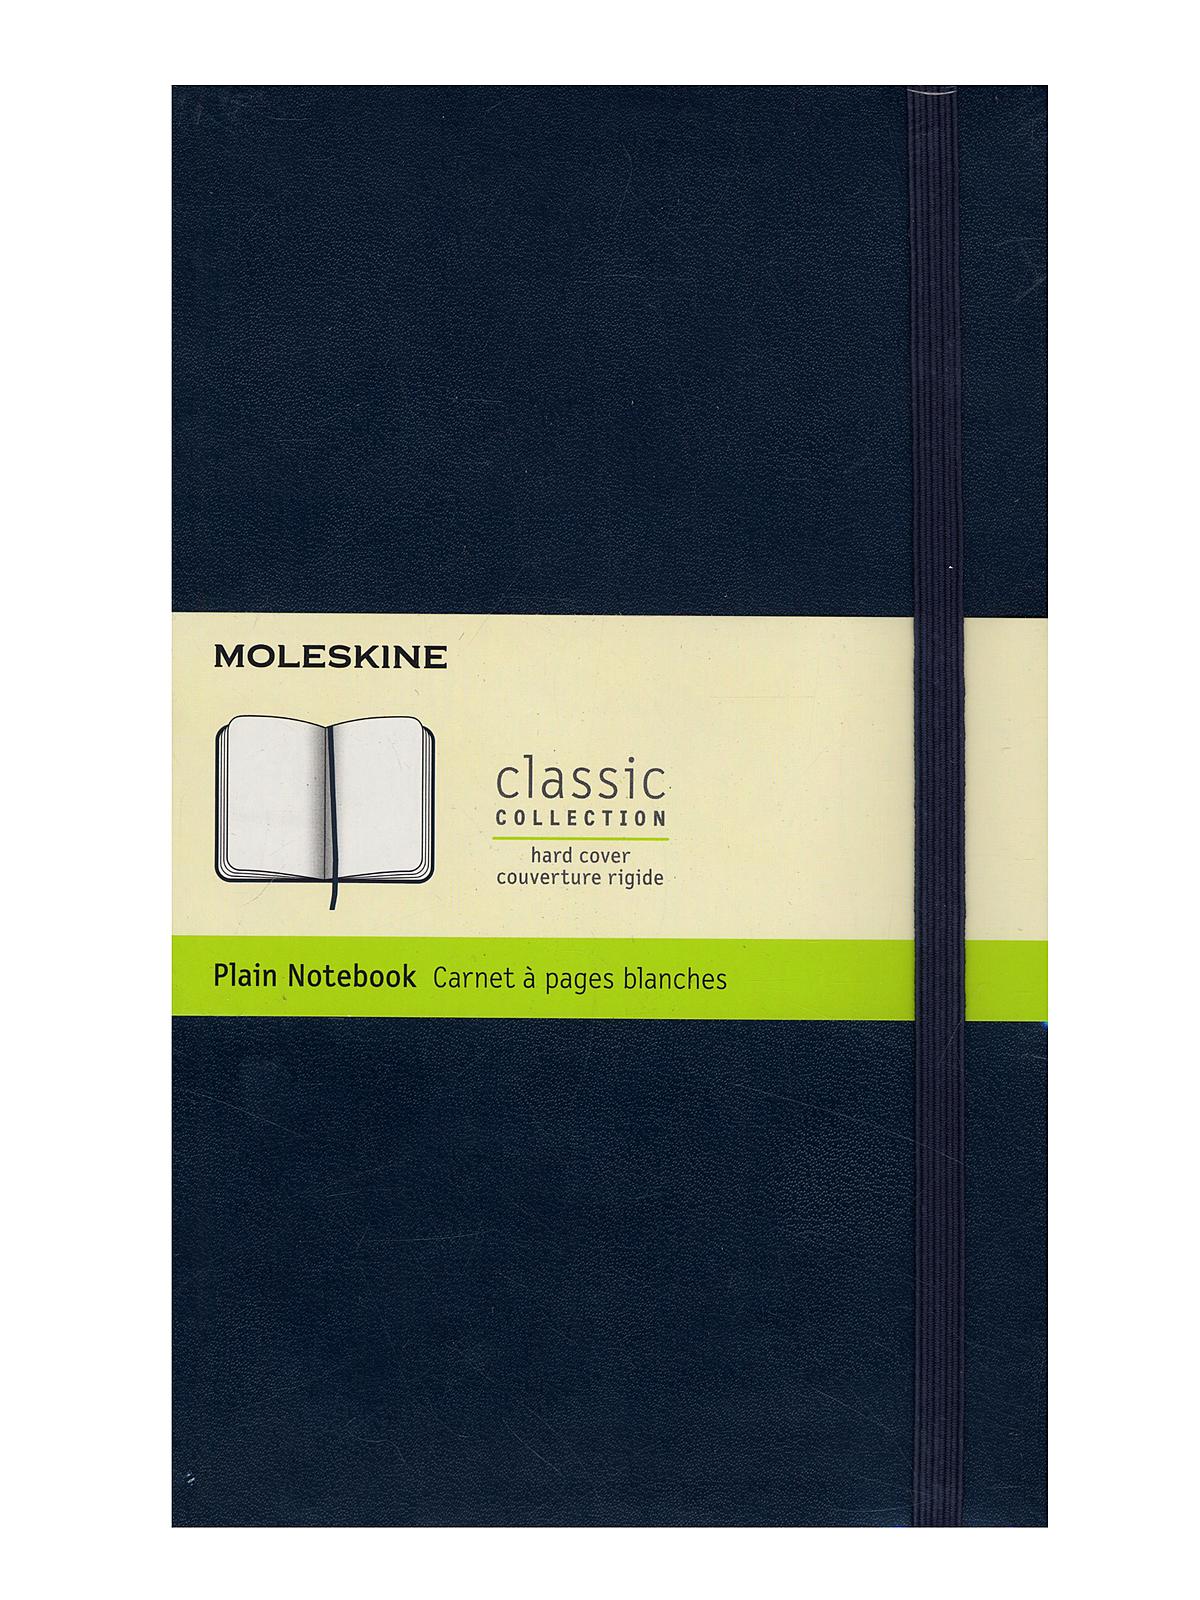 Classic Hard Cover Notebooks Sapphire Blue 5 In. X 8 1 4 In. 240 Pages, Unlined